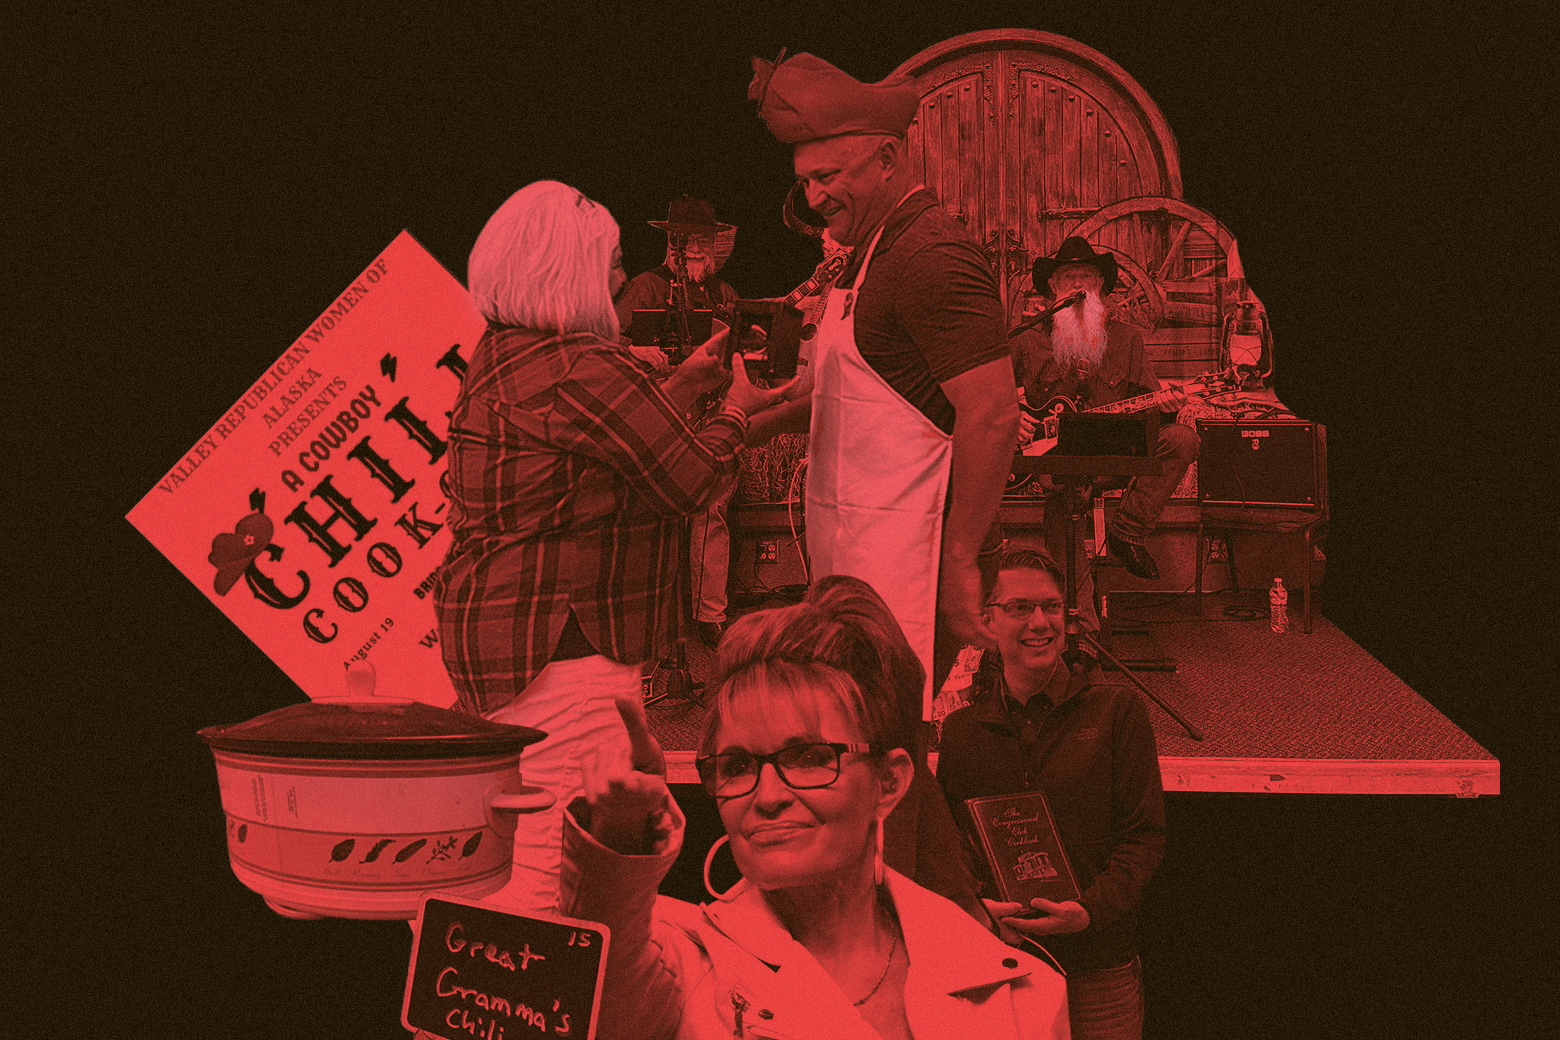 A collage featuring Sarah Palin and images from the chili cook-off.